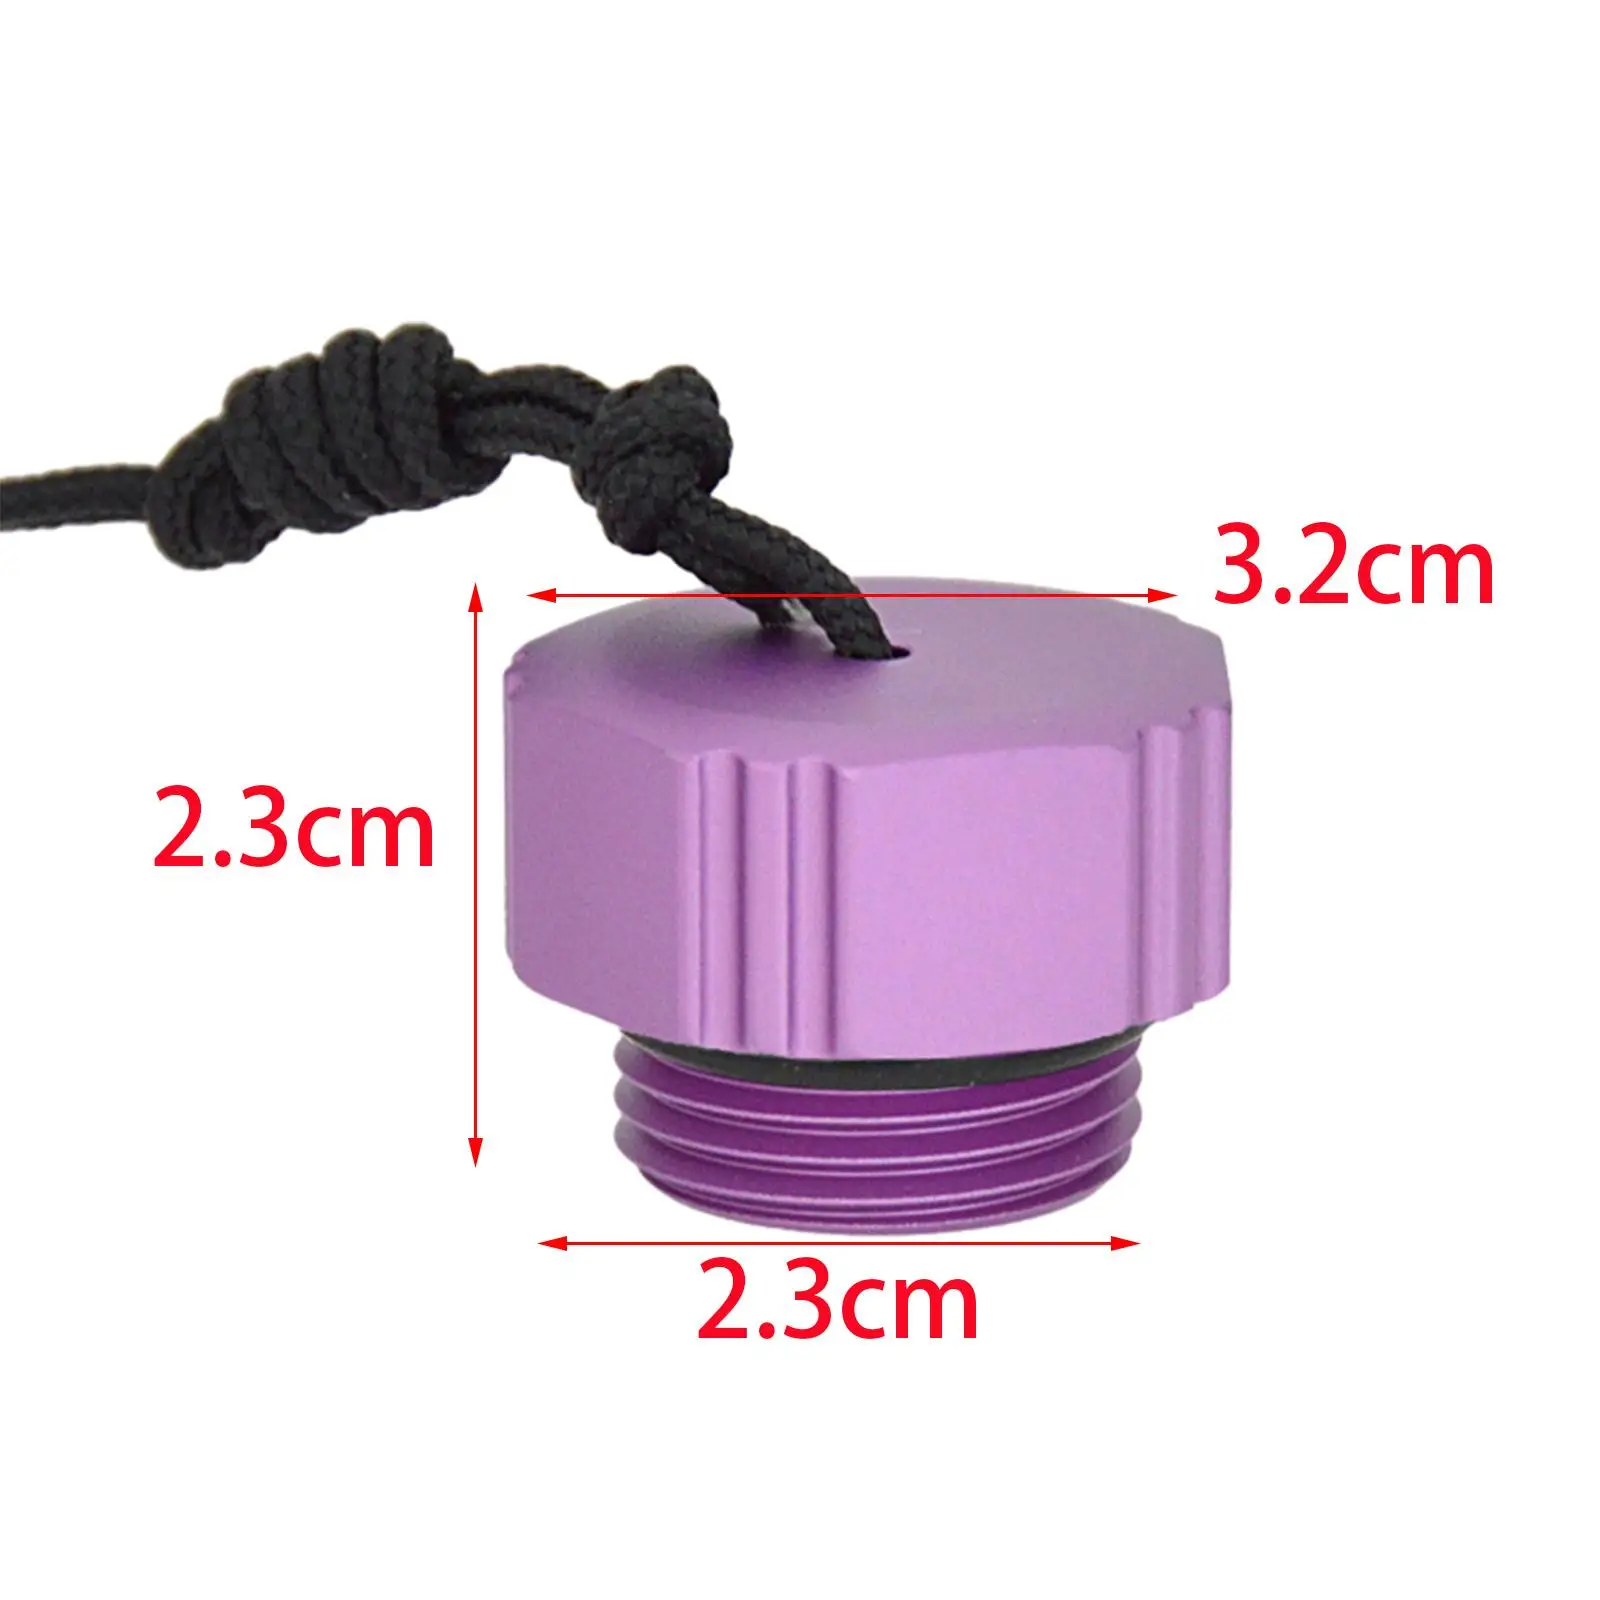 Diving Dust Cap Protector Outdoor Sturdy Swimming Pool Accessories Din Tank Valve Cover Dust Plug for Din Scuba Tank Valve 